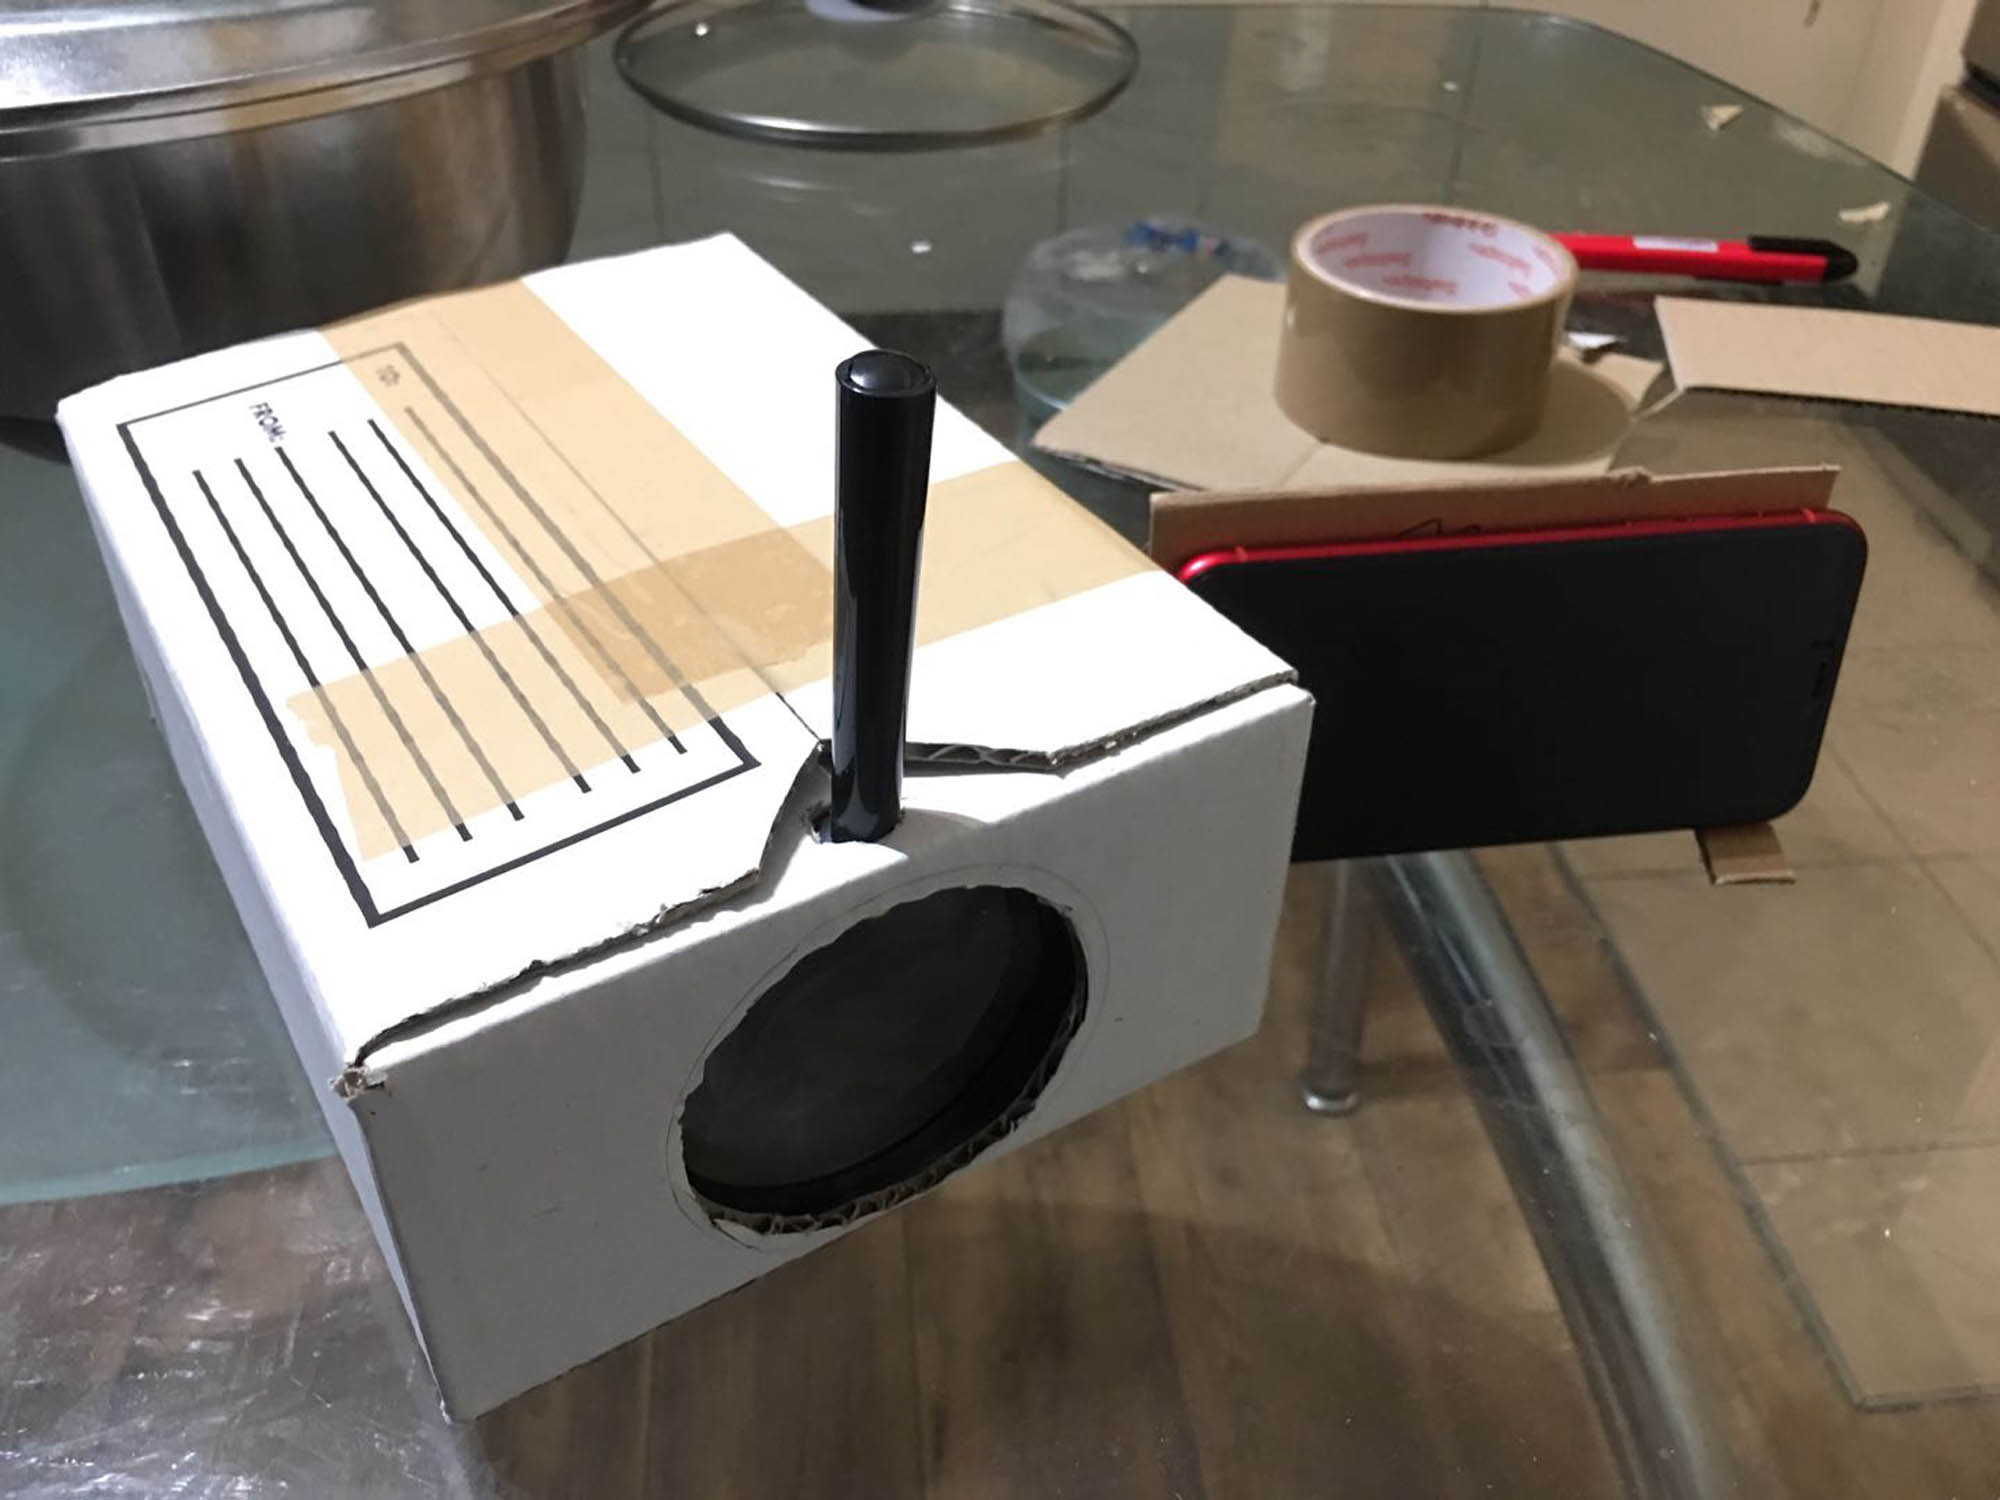 The homemade projector